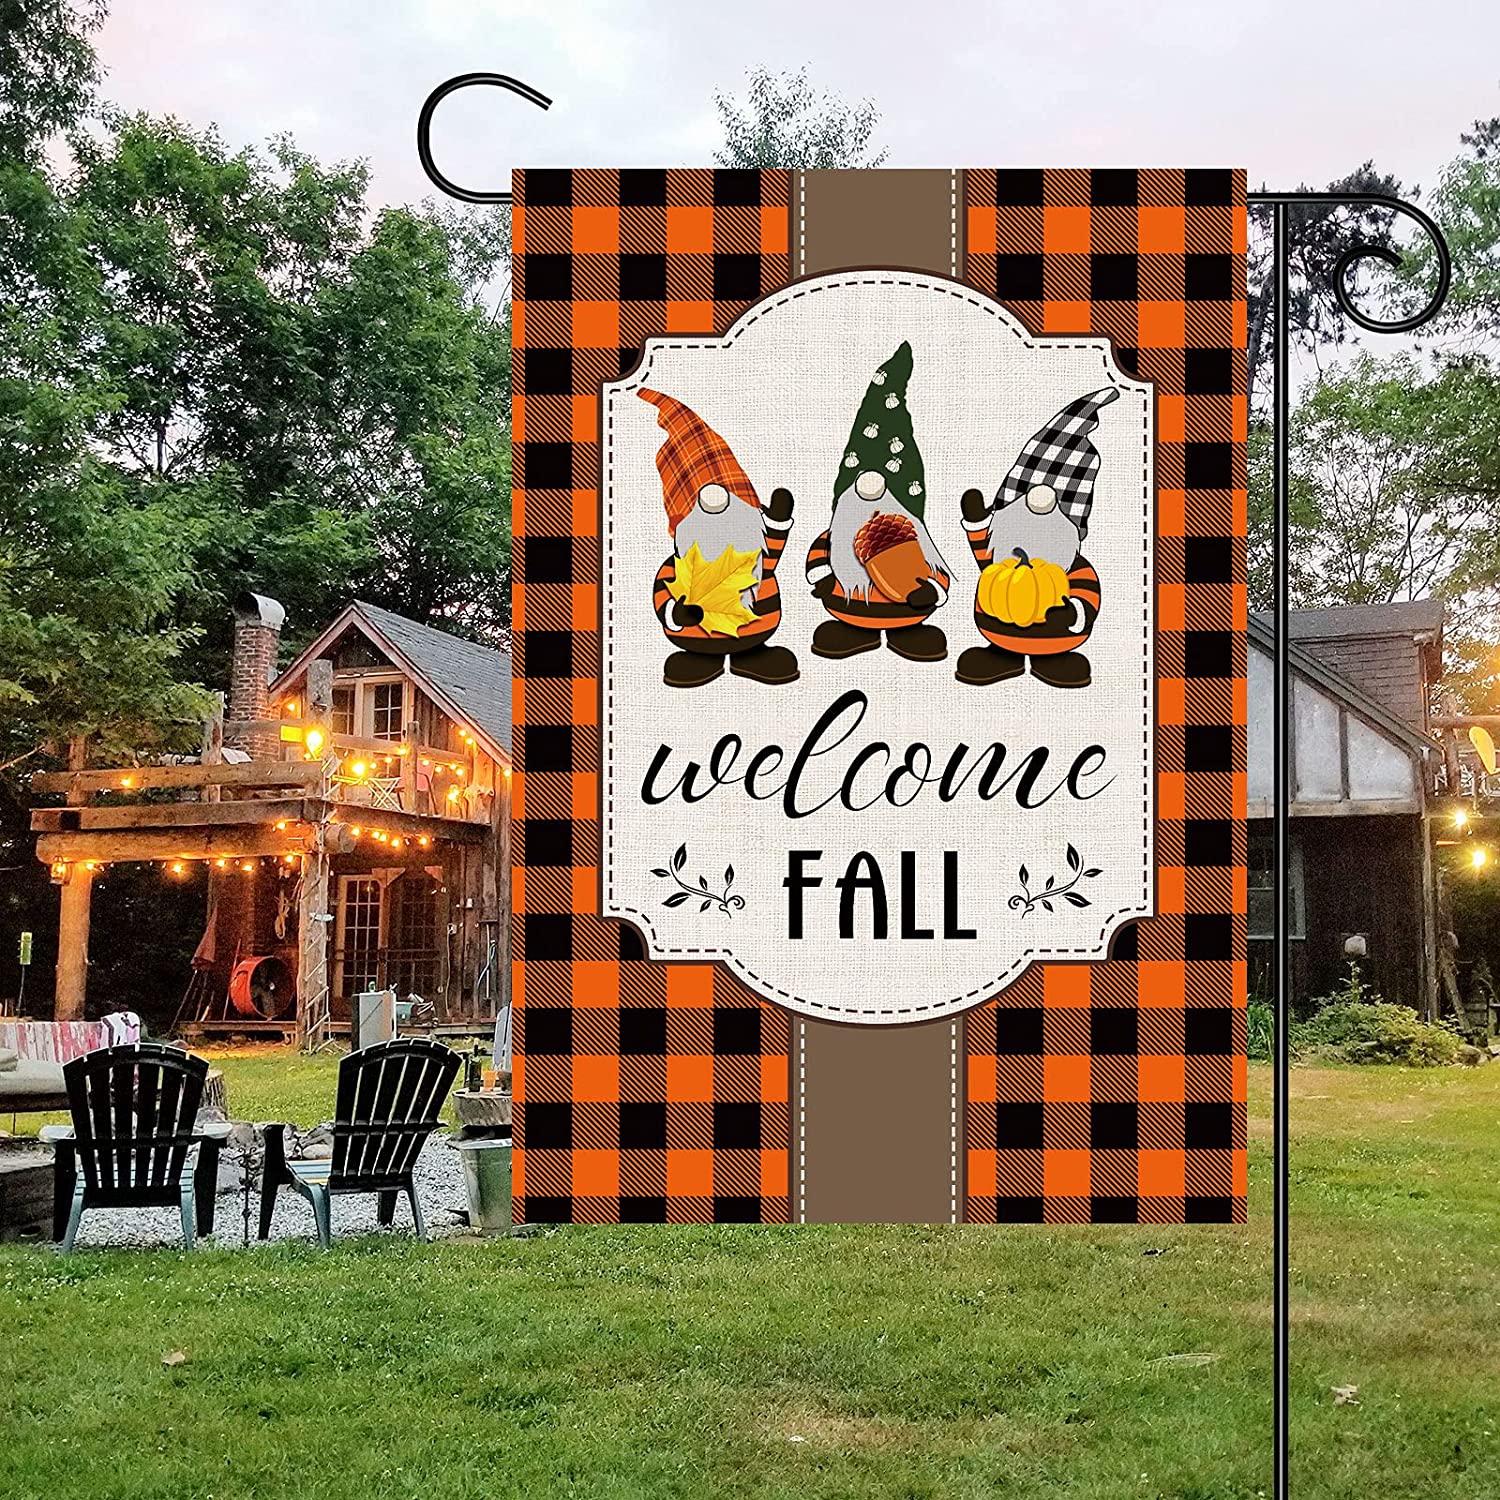 2 Pcs Double Sided Harvest Fall Garden Flags 12 x 18 (Plaid, Truck)